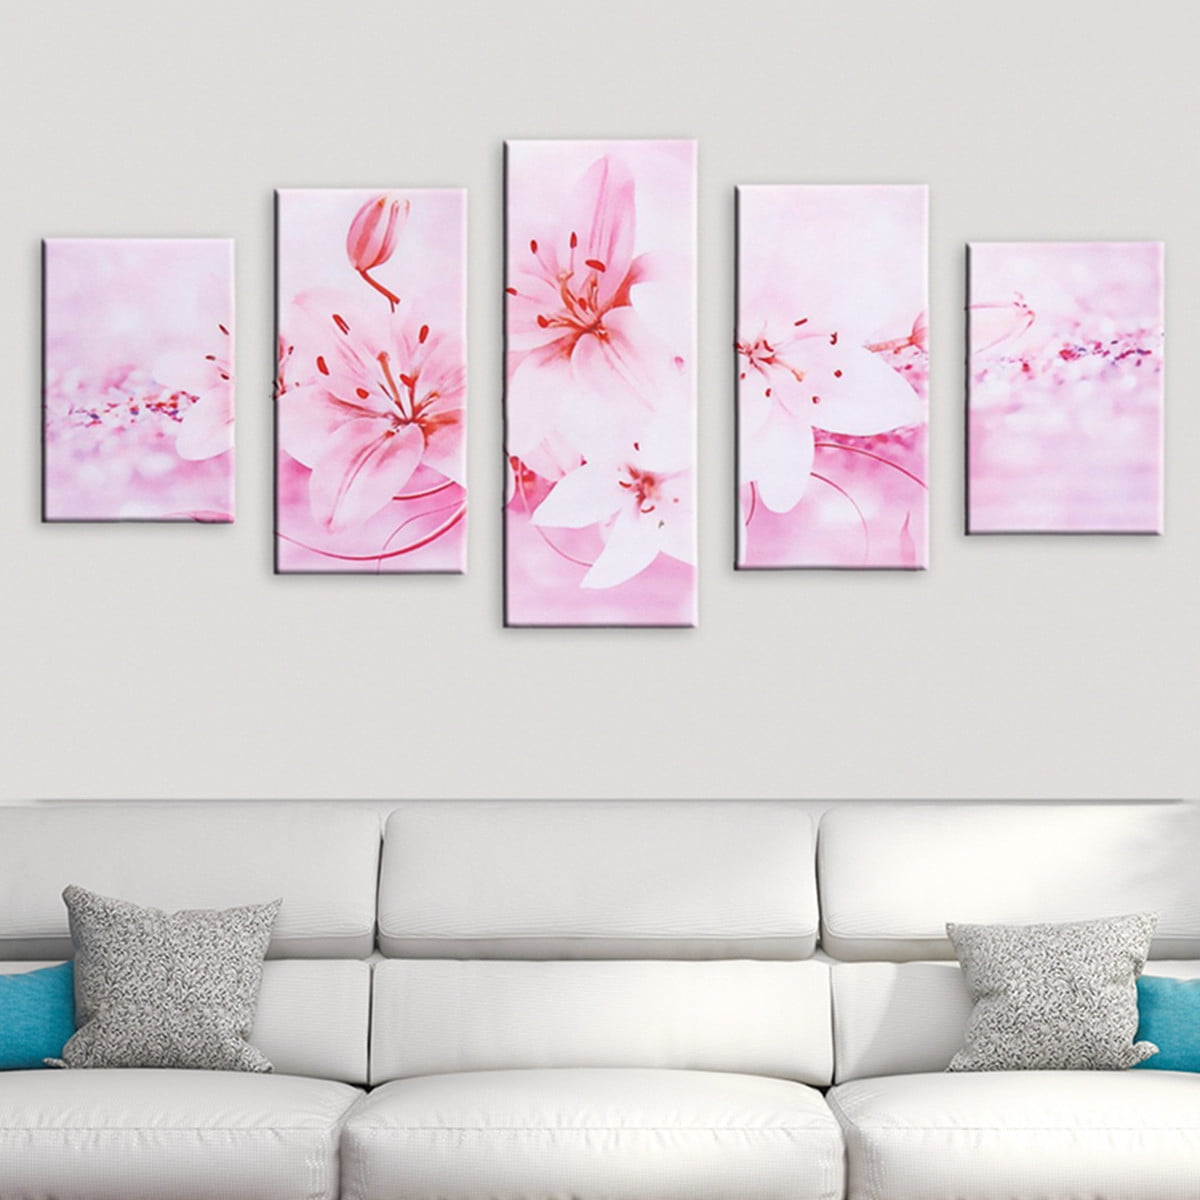 5 Panels Canvas Print Modern Abstract Flower Floral Painting Landscape Picture Wall Art Decor Living Room Bedroom Home Decoration Walmart Canada